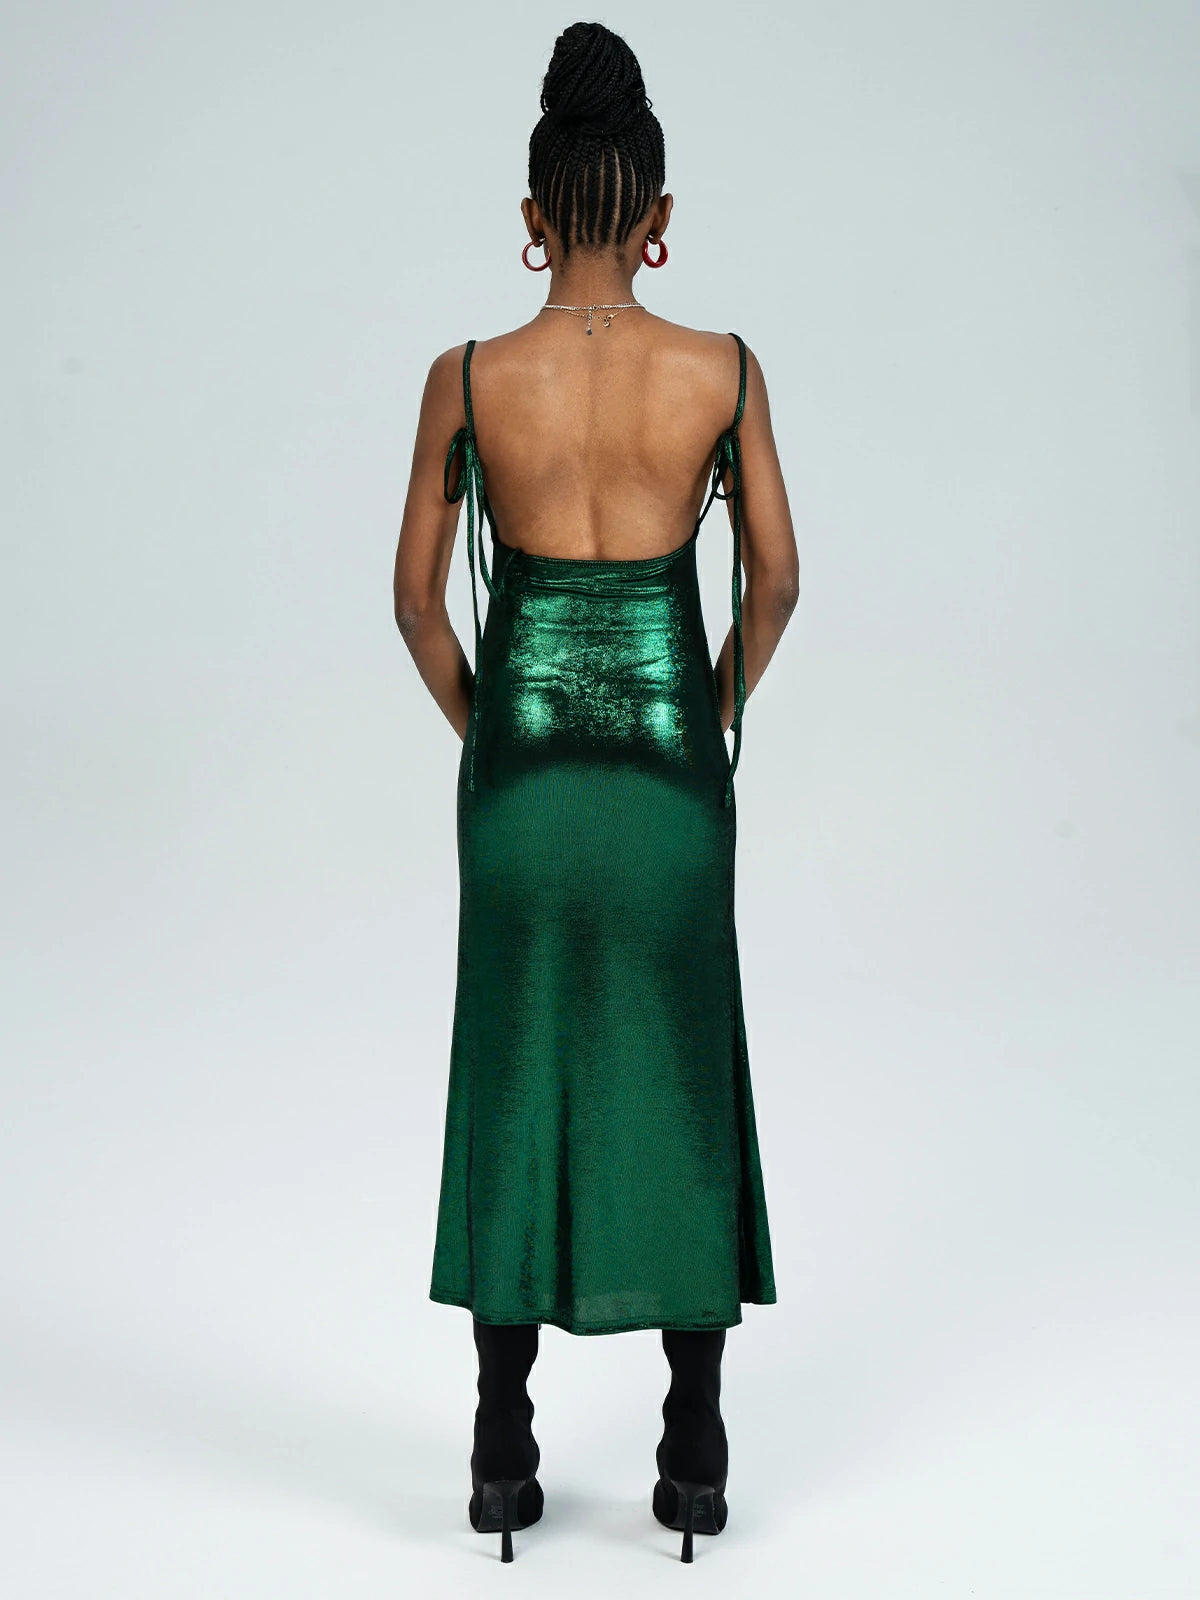 Adorned with a vibrant green glossy finish, this chic dress features a square neckline and side slit for a fashion-forward statement.